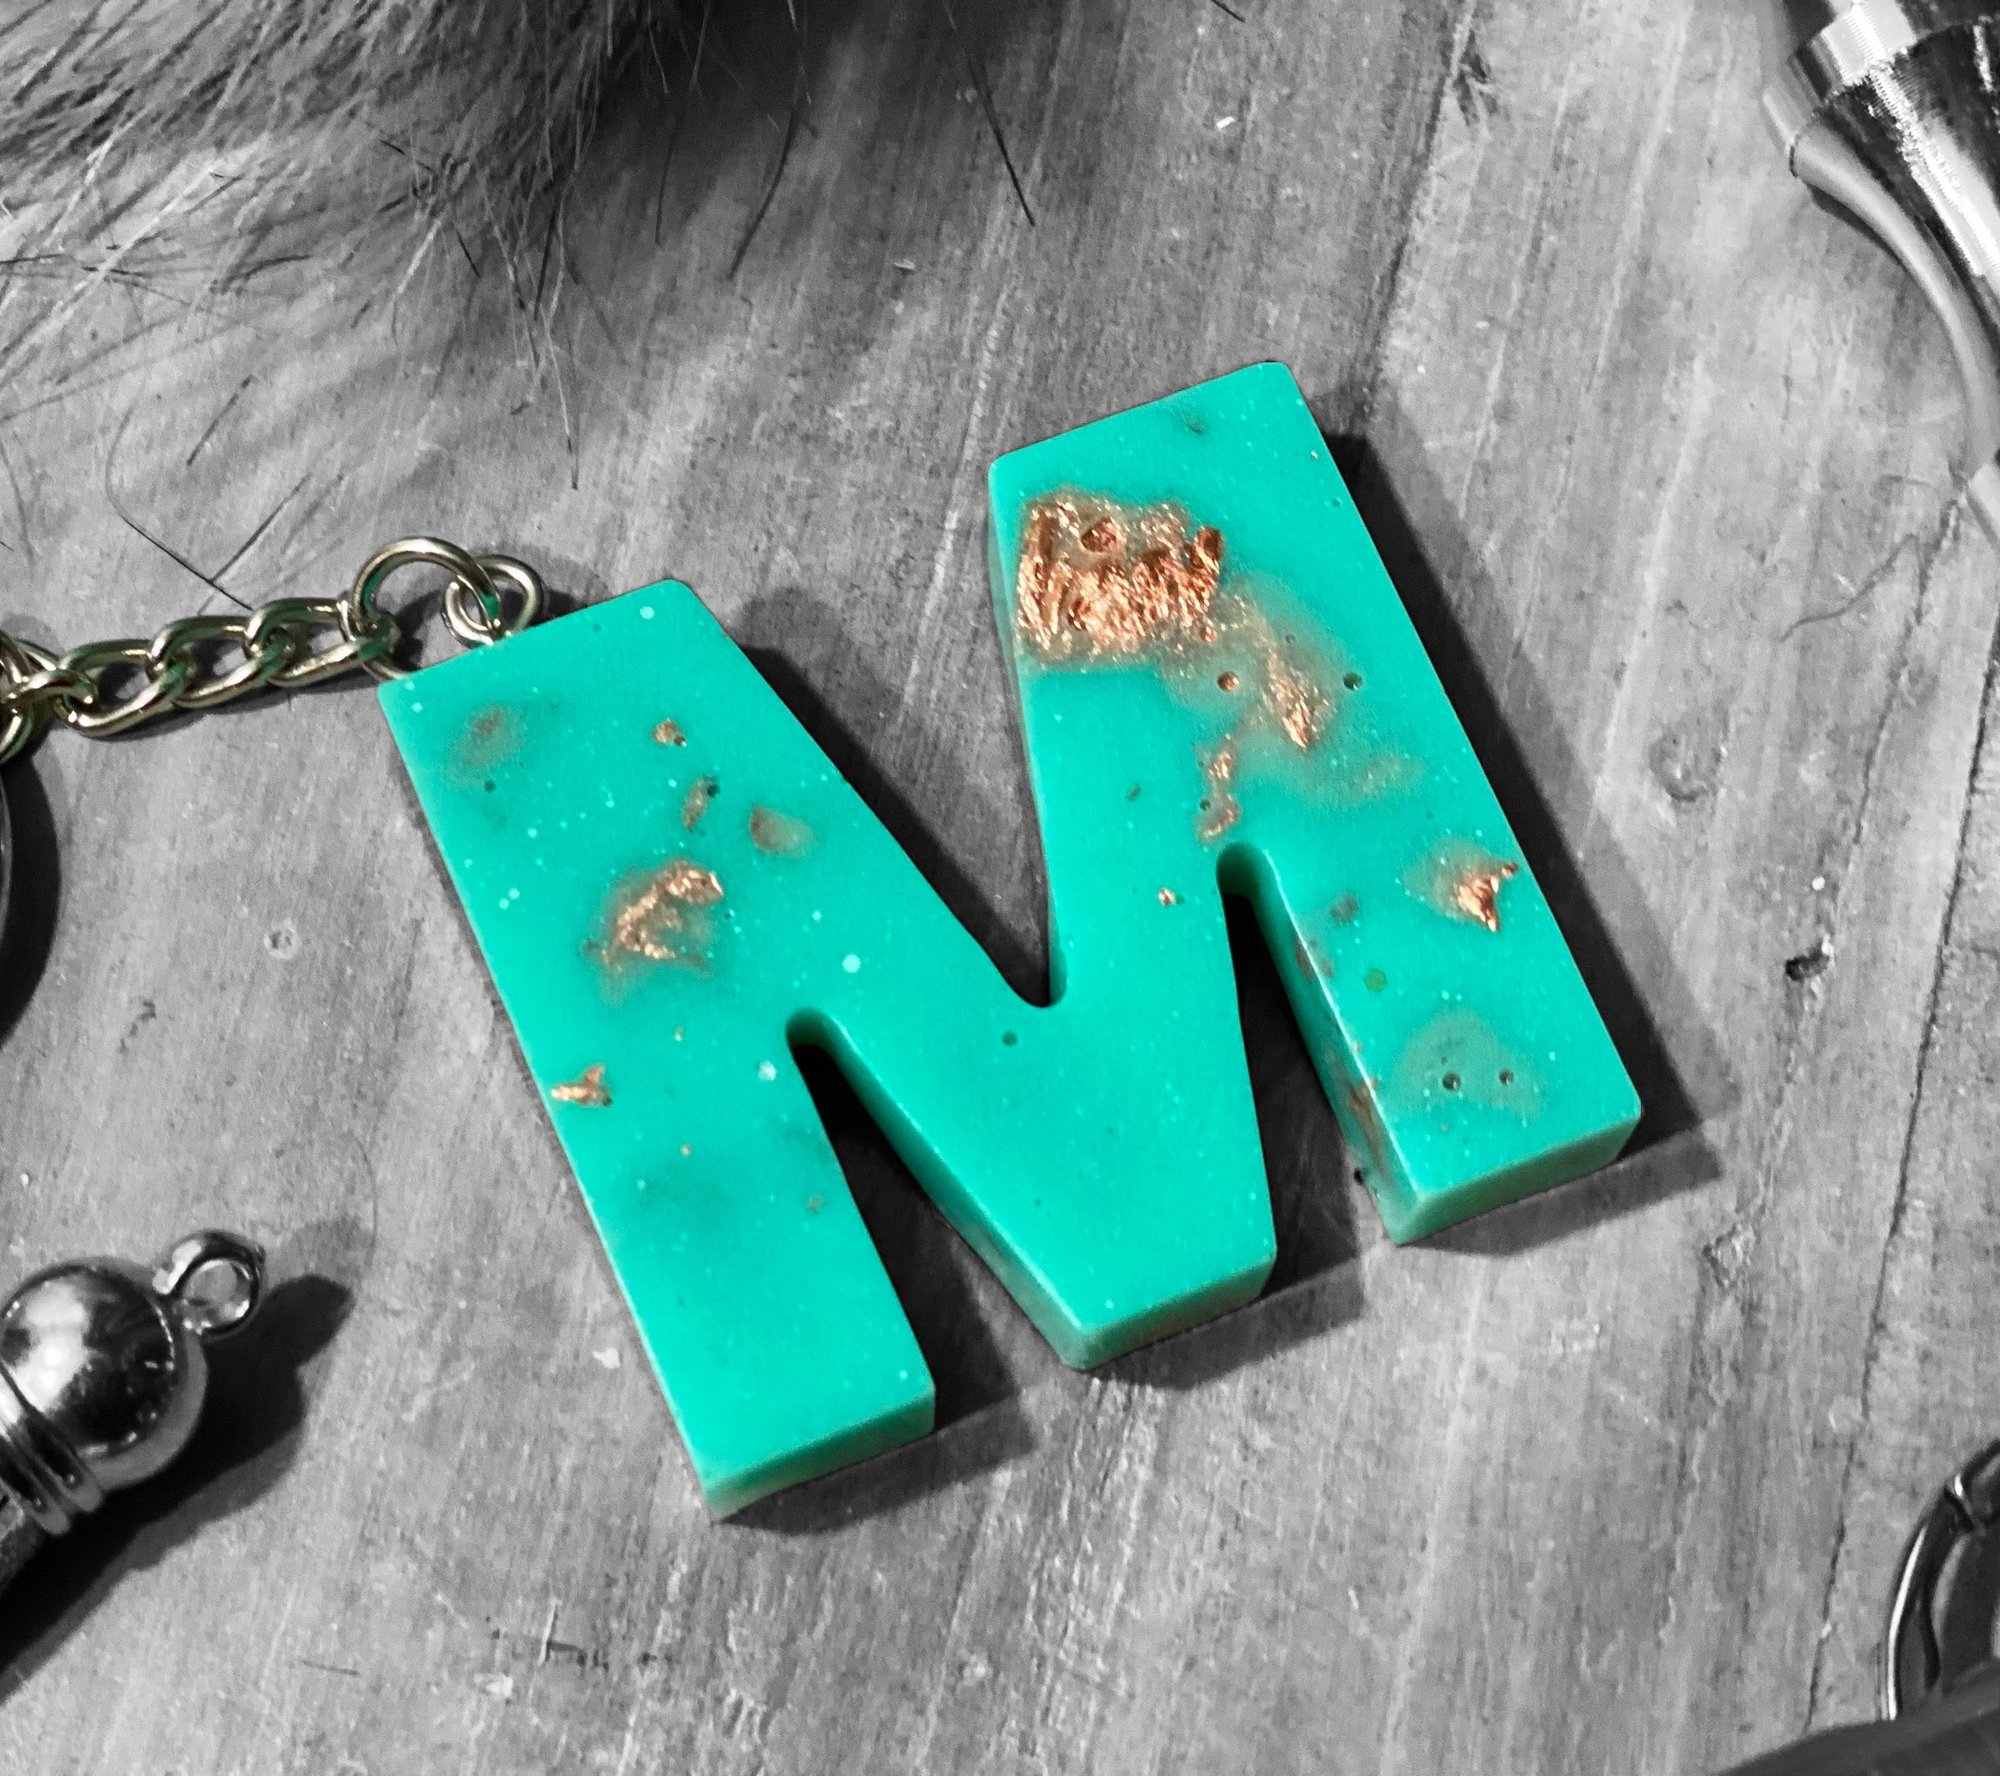 https://assets.bigcartel.com/product_images/a8169779-680d-456e-ad3a-f11145e65778/teal-foil-initial-keychain.jpg?auto=format&fit=max&w=2000